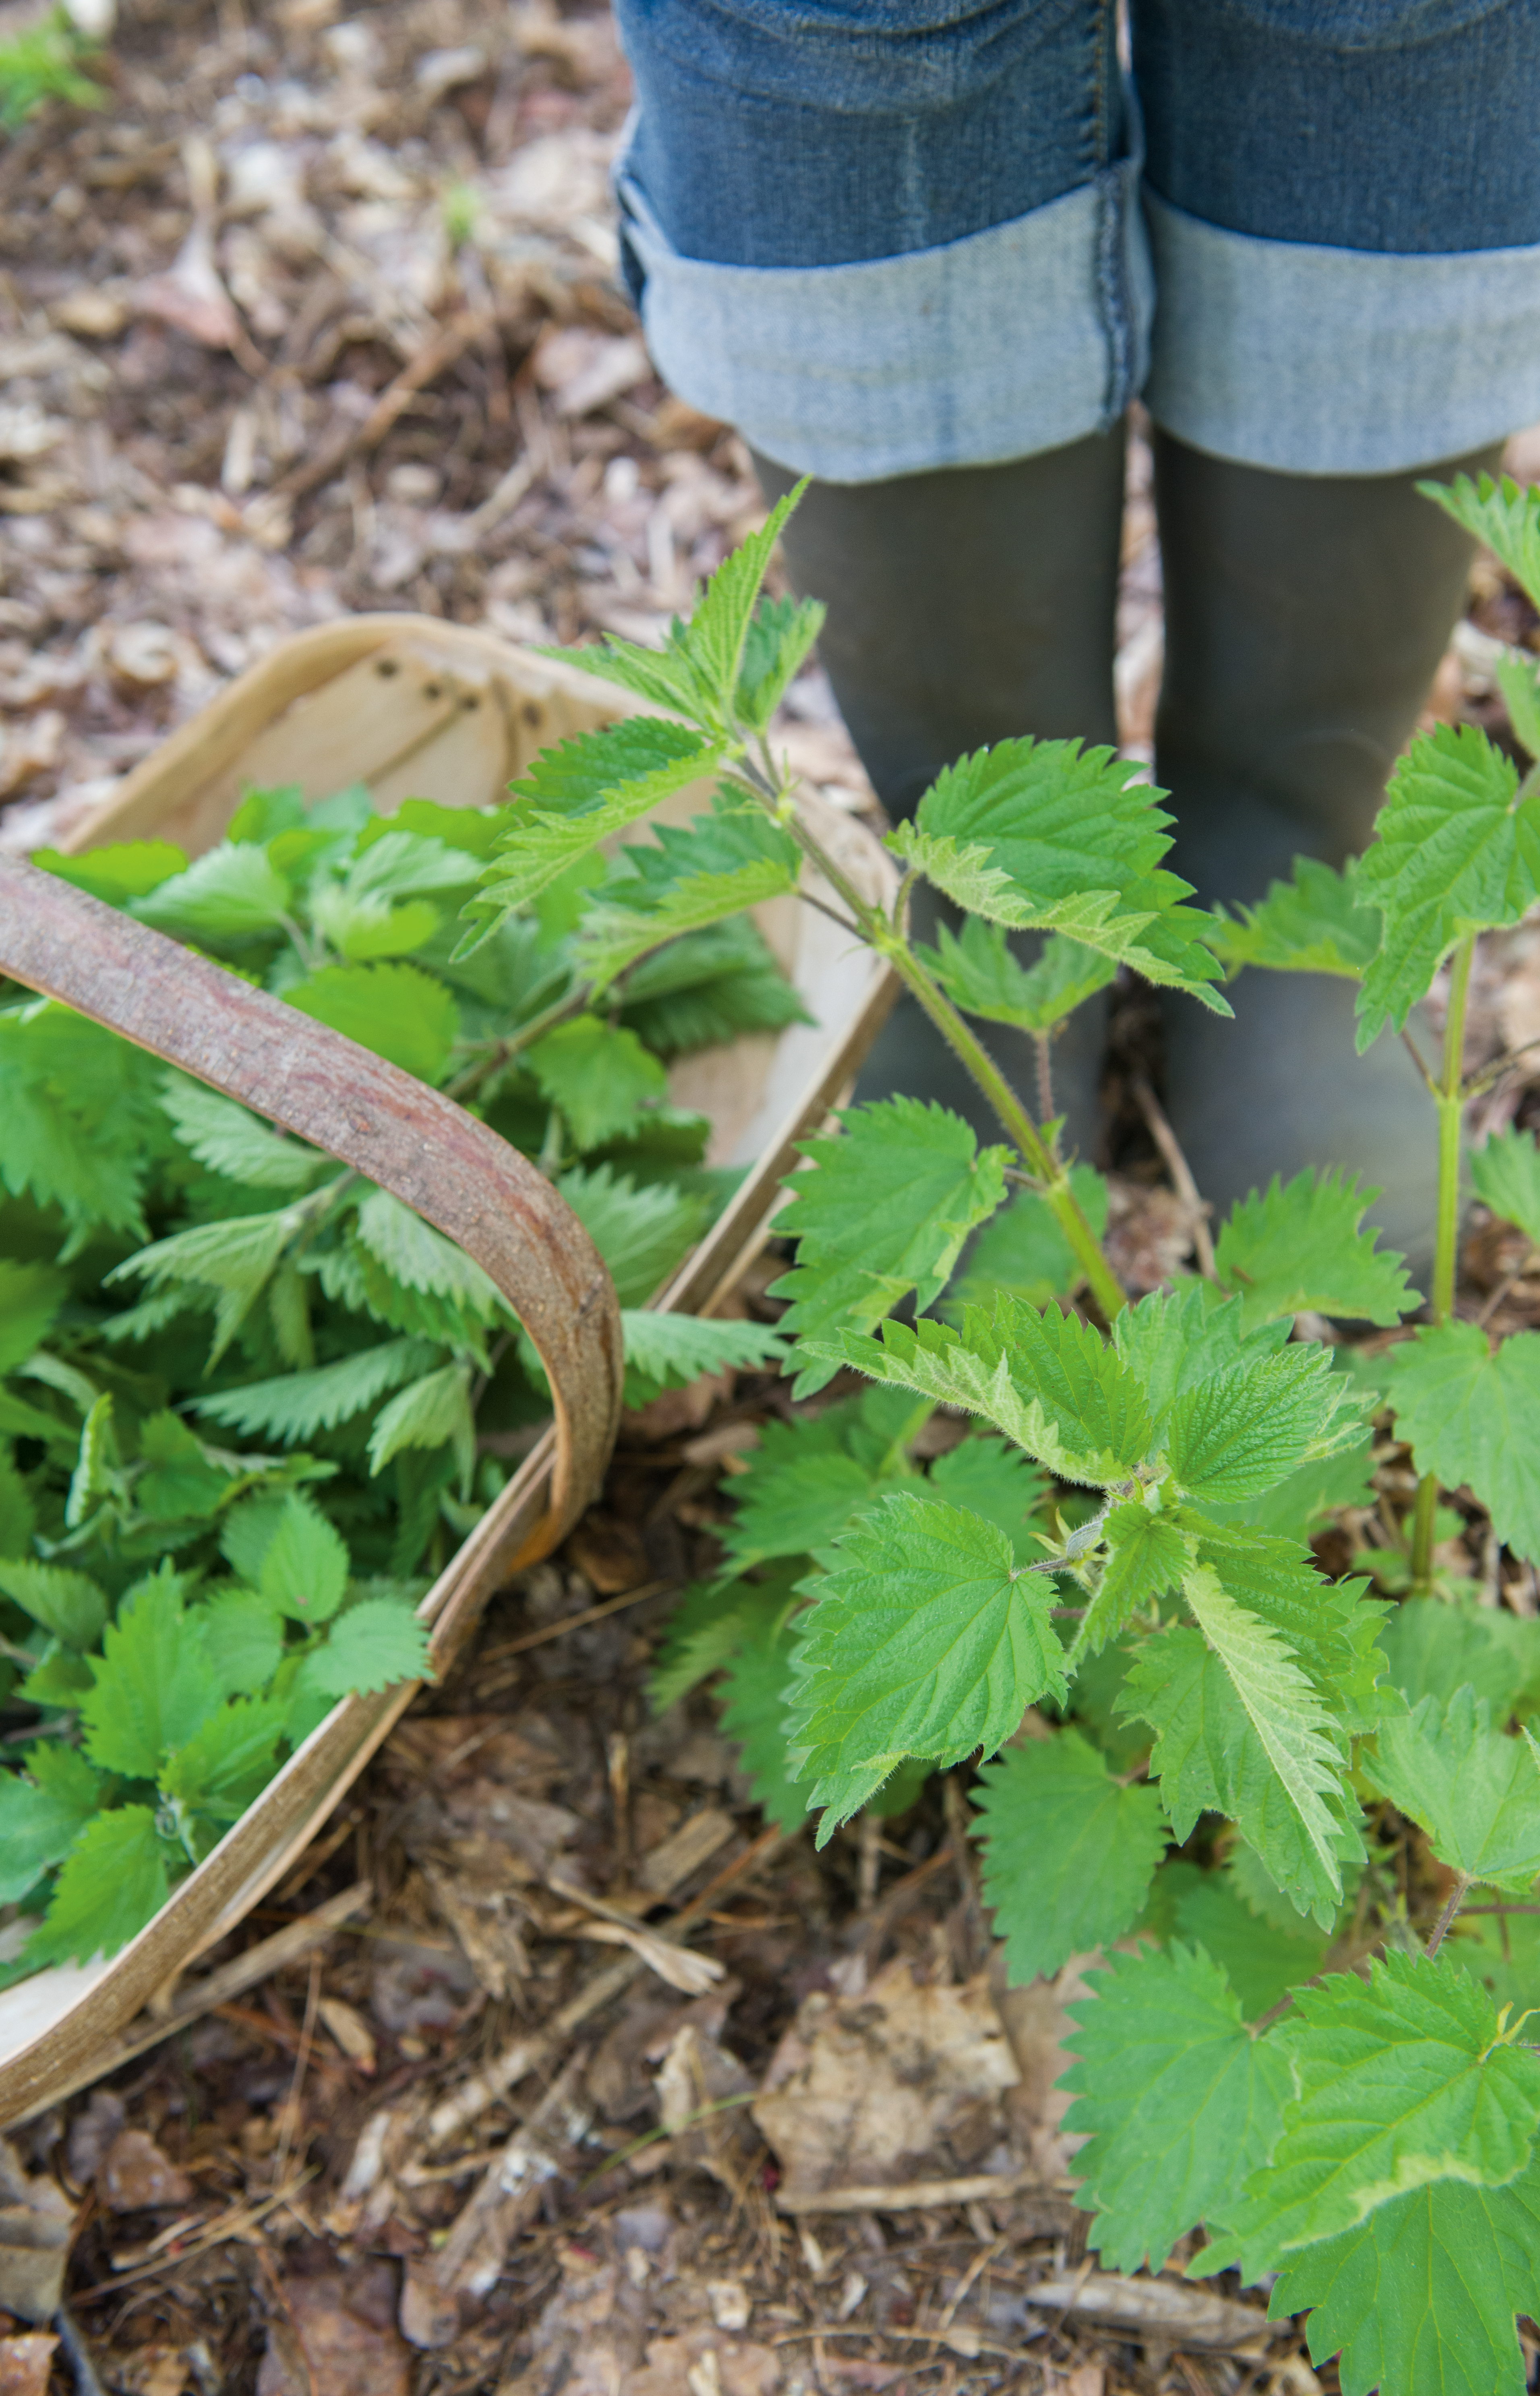 Nettles with a basket and boots in the background.